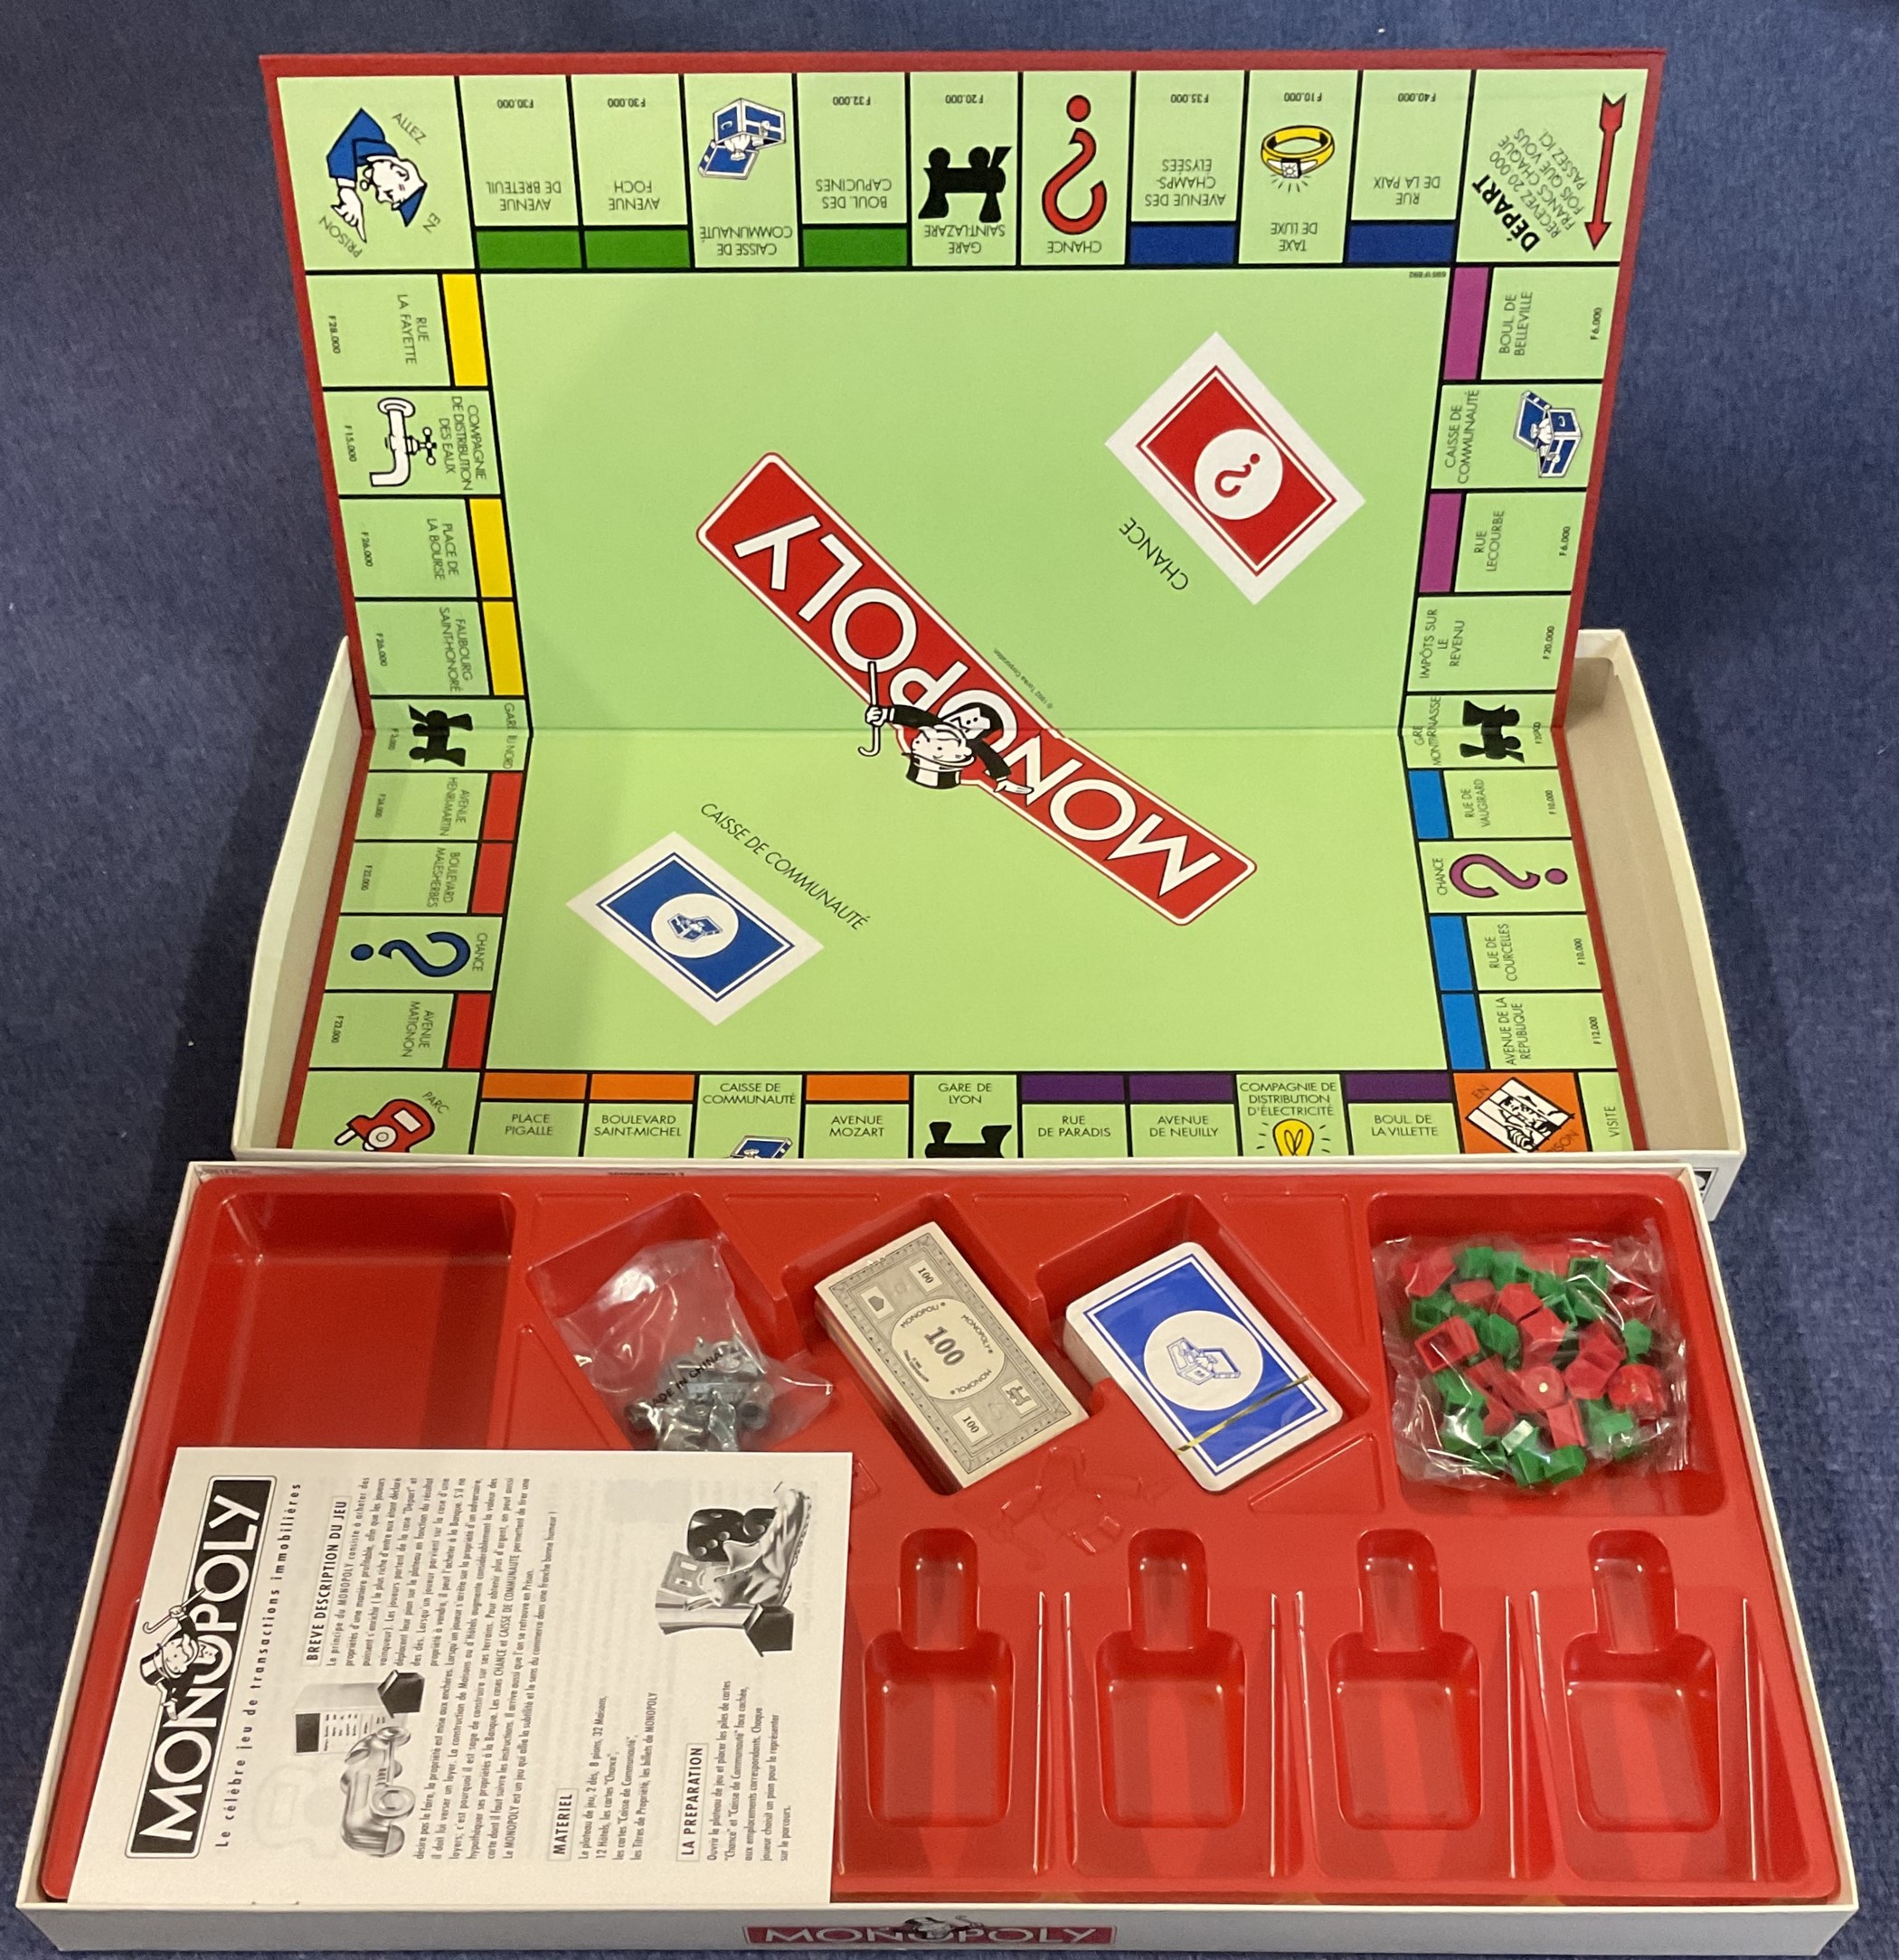 Monopoly game. French Edition. Produced in 1992 in Ireland. All contents inside unopened wrappers, - Image 2 of 2